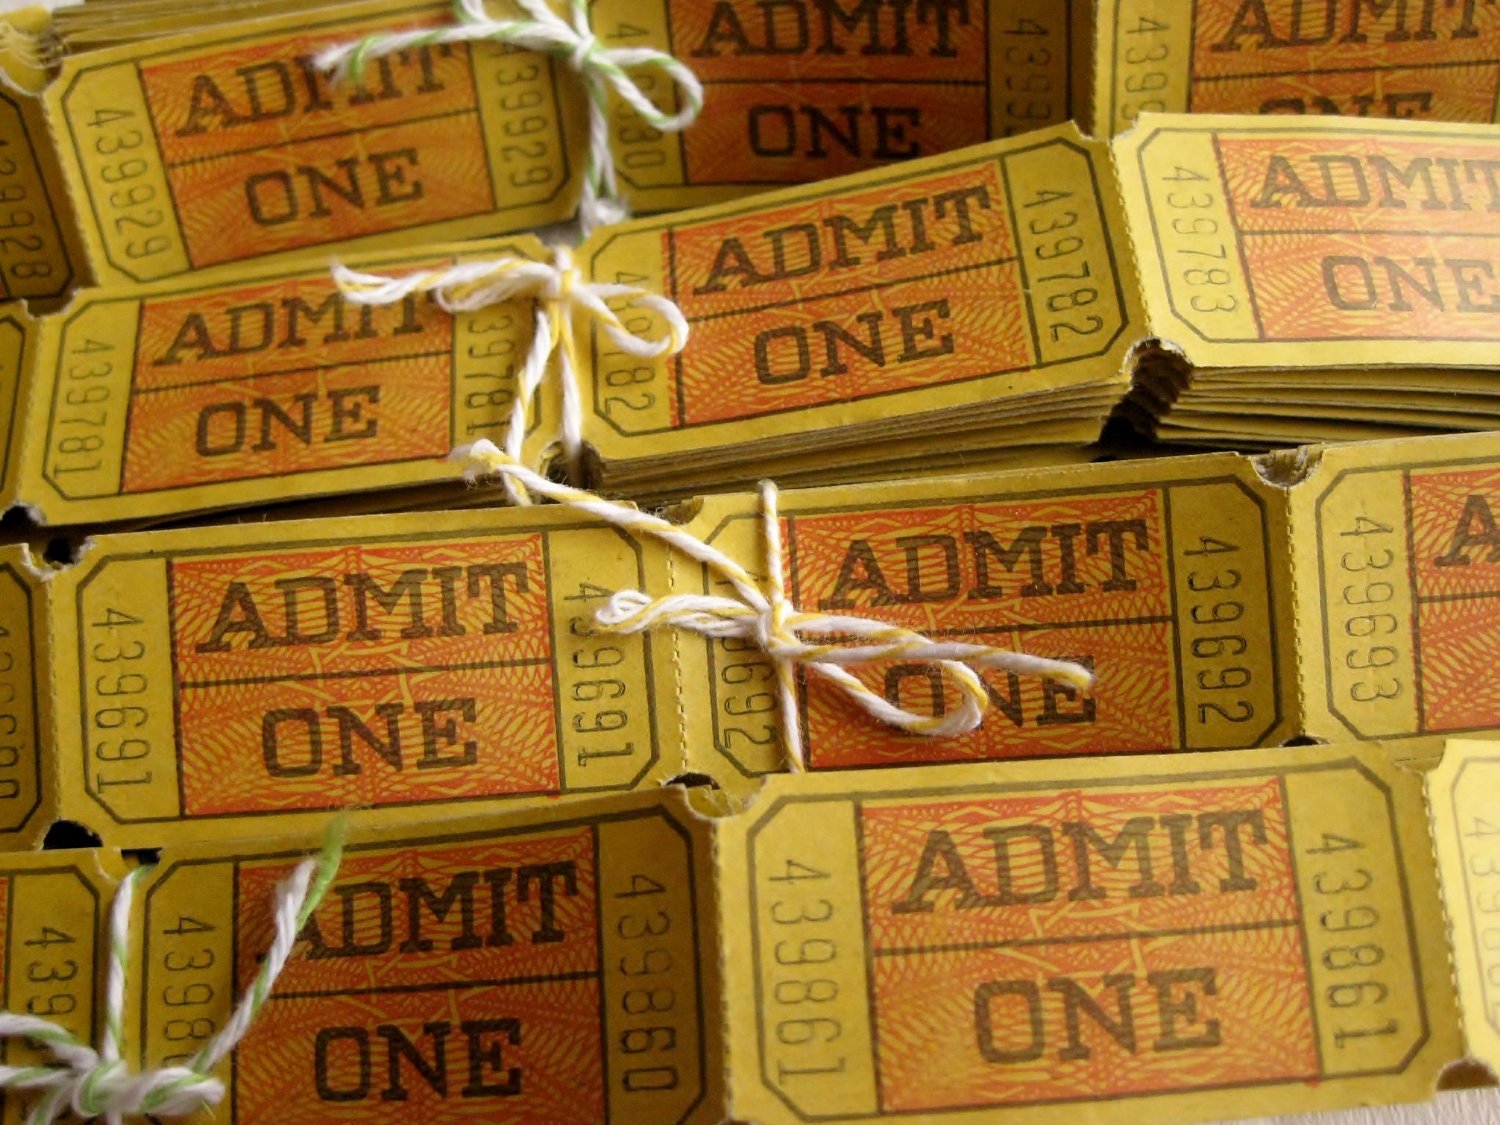 Vintage Yellow Carnival Style ADMIT ONE Admittance Tickets - Set of 20